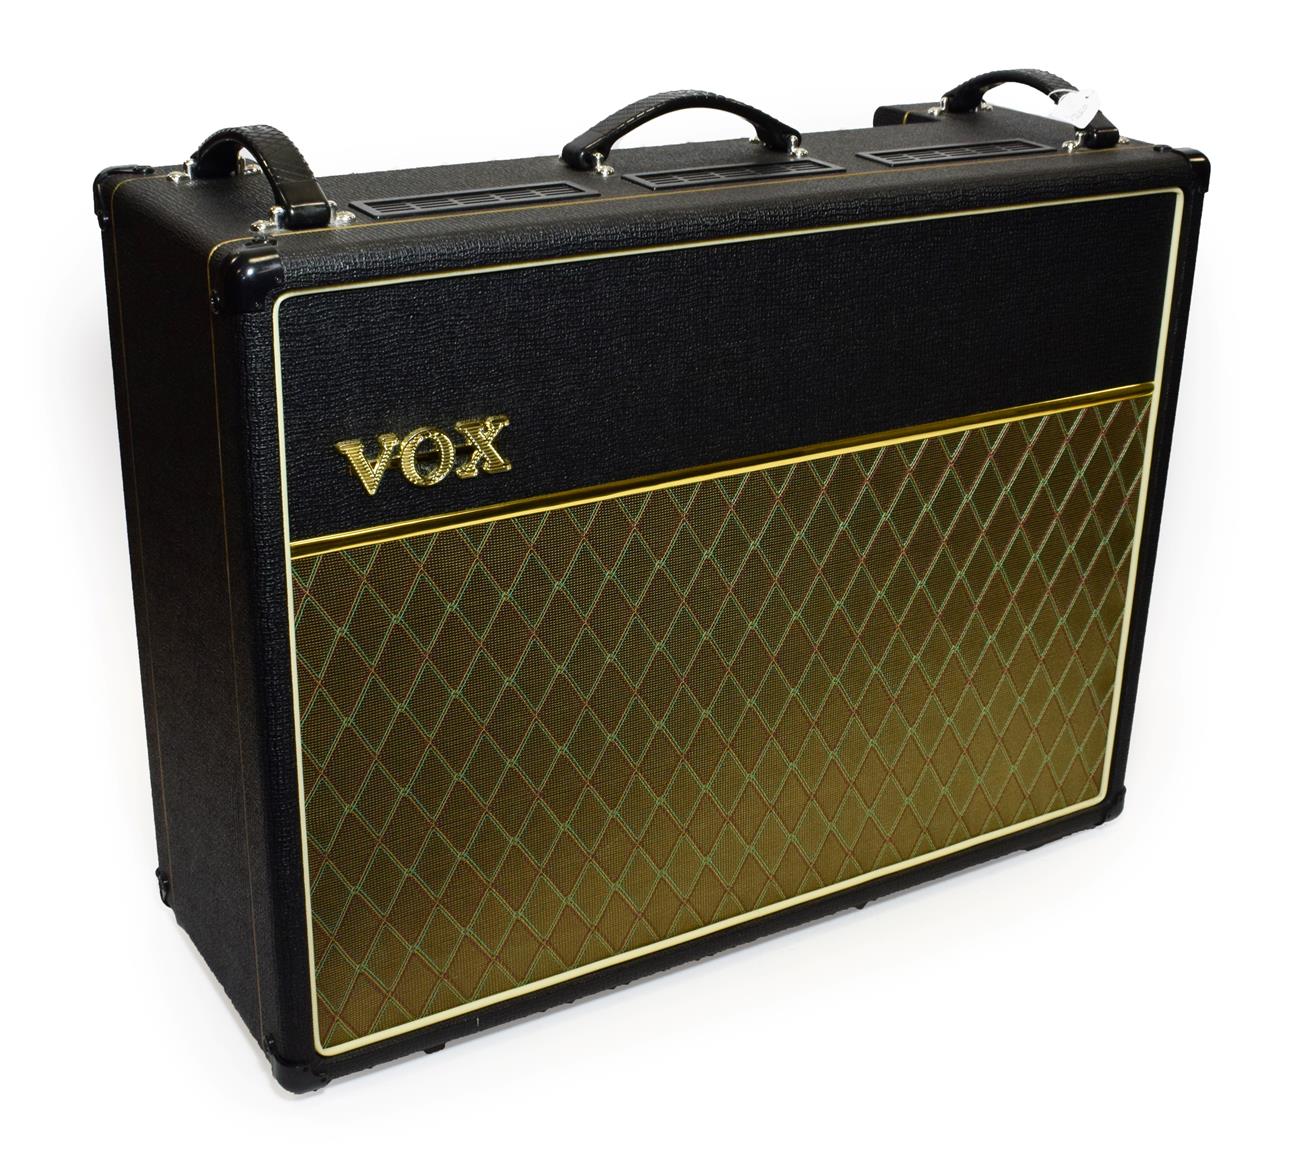 Lot 3036 - Vox AC30 CC2 Amplifier various controls including reverb, tremelo. tone and volume as well as...